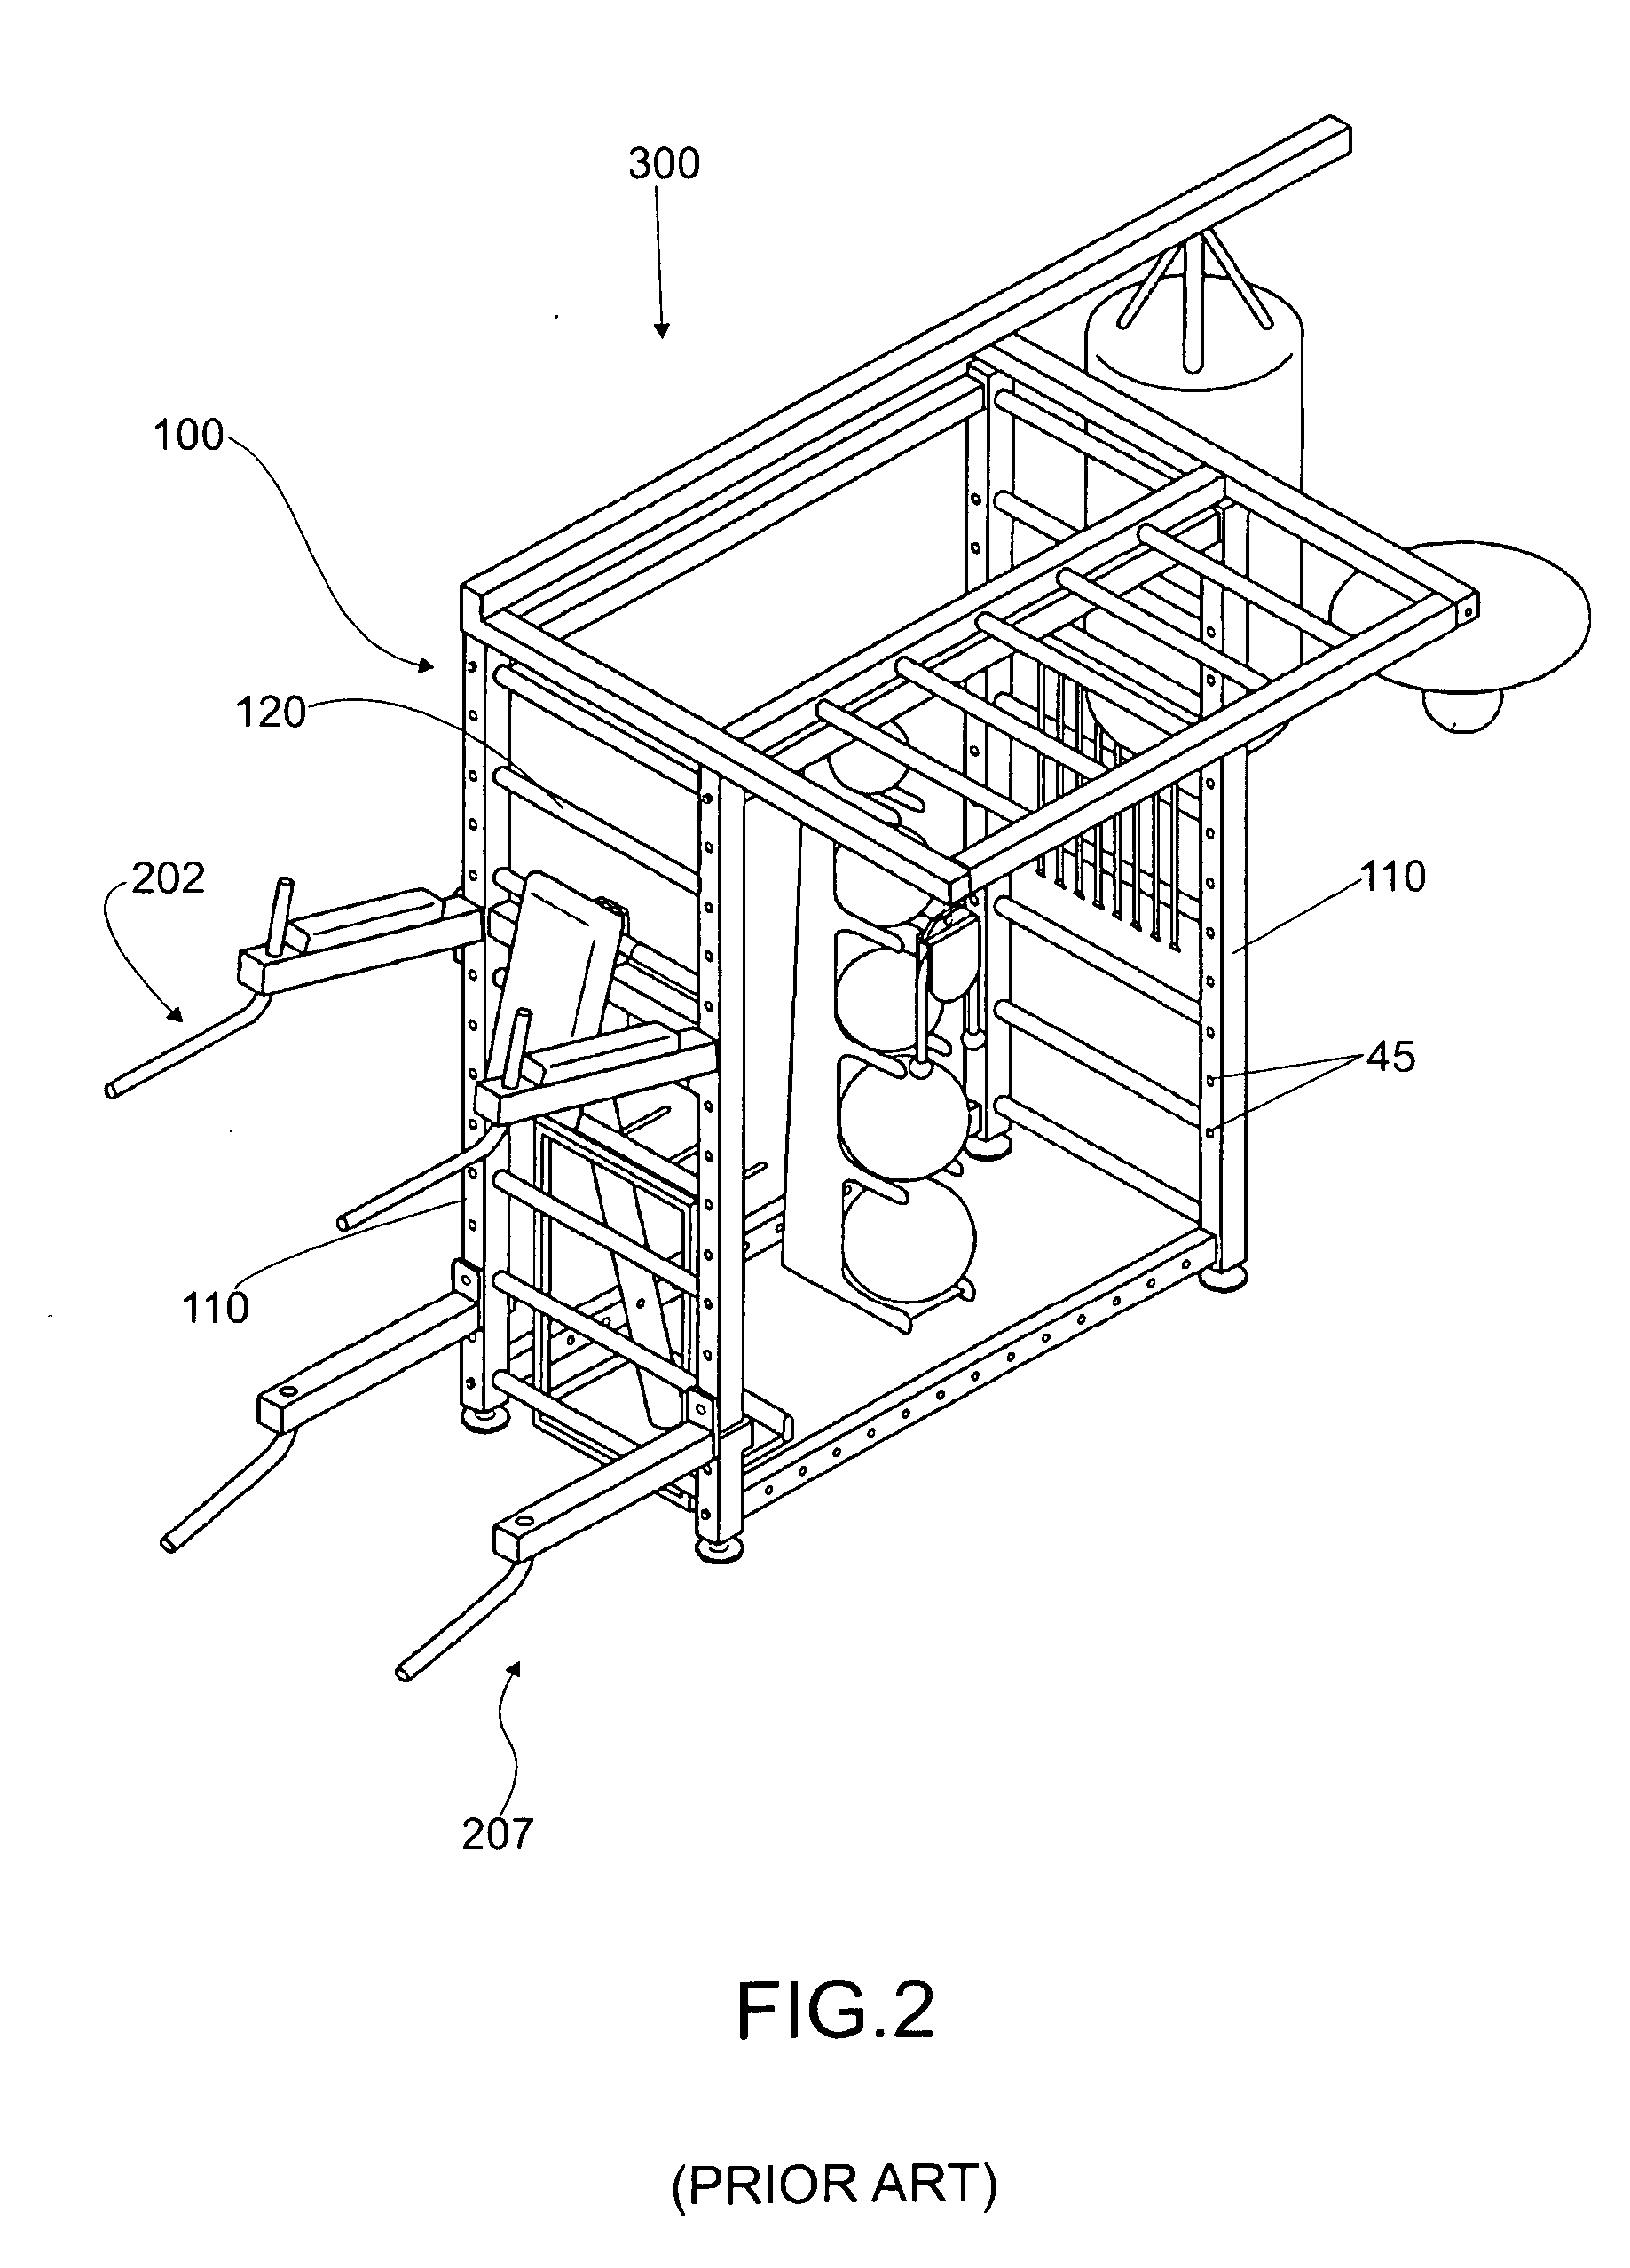 Arrangement for attaching an exercise device to a ladder-like frame of an exercise machine